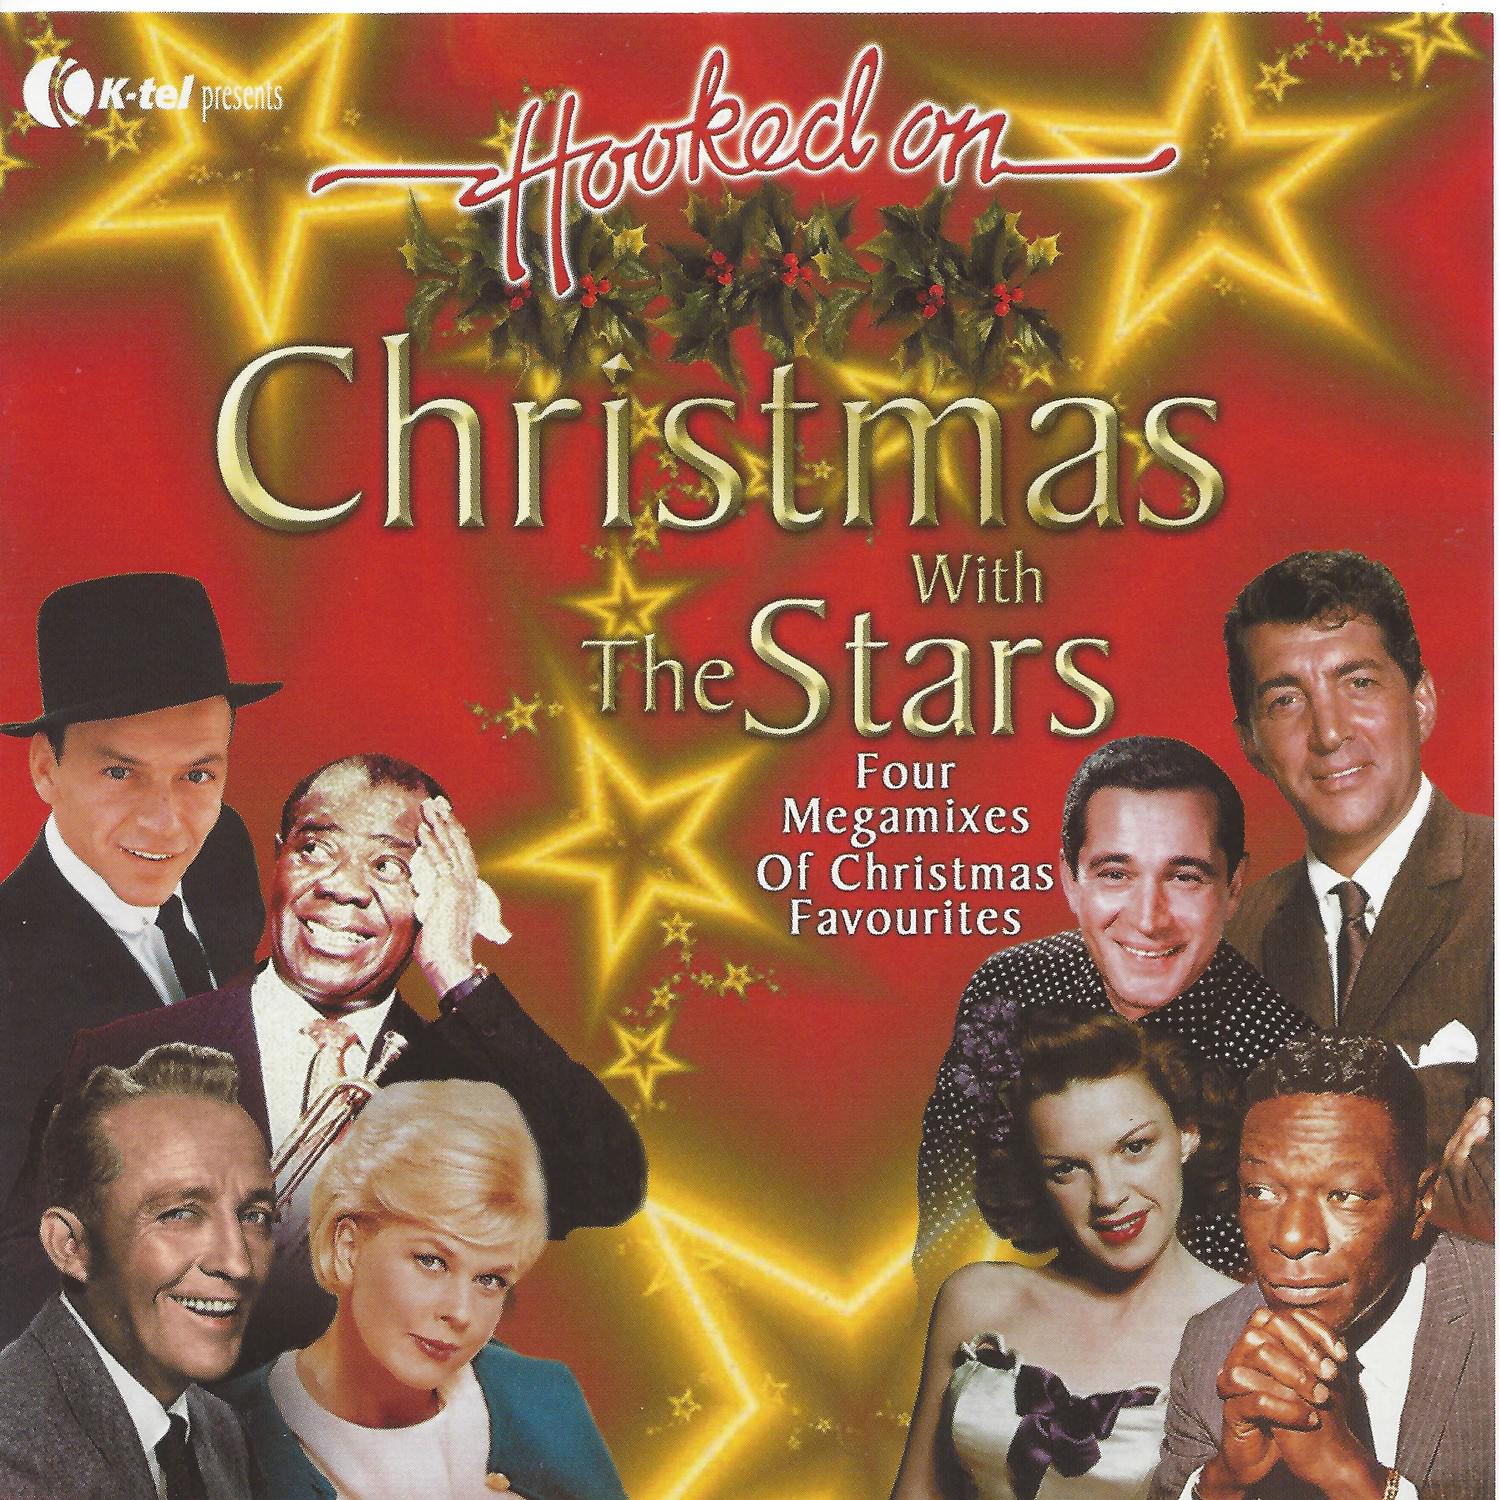 Hooked on a White Christmas: White Christmas / The Christmas Song